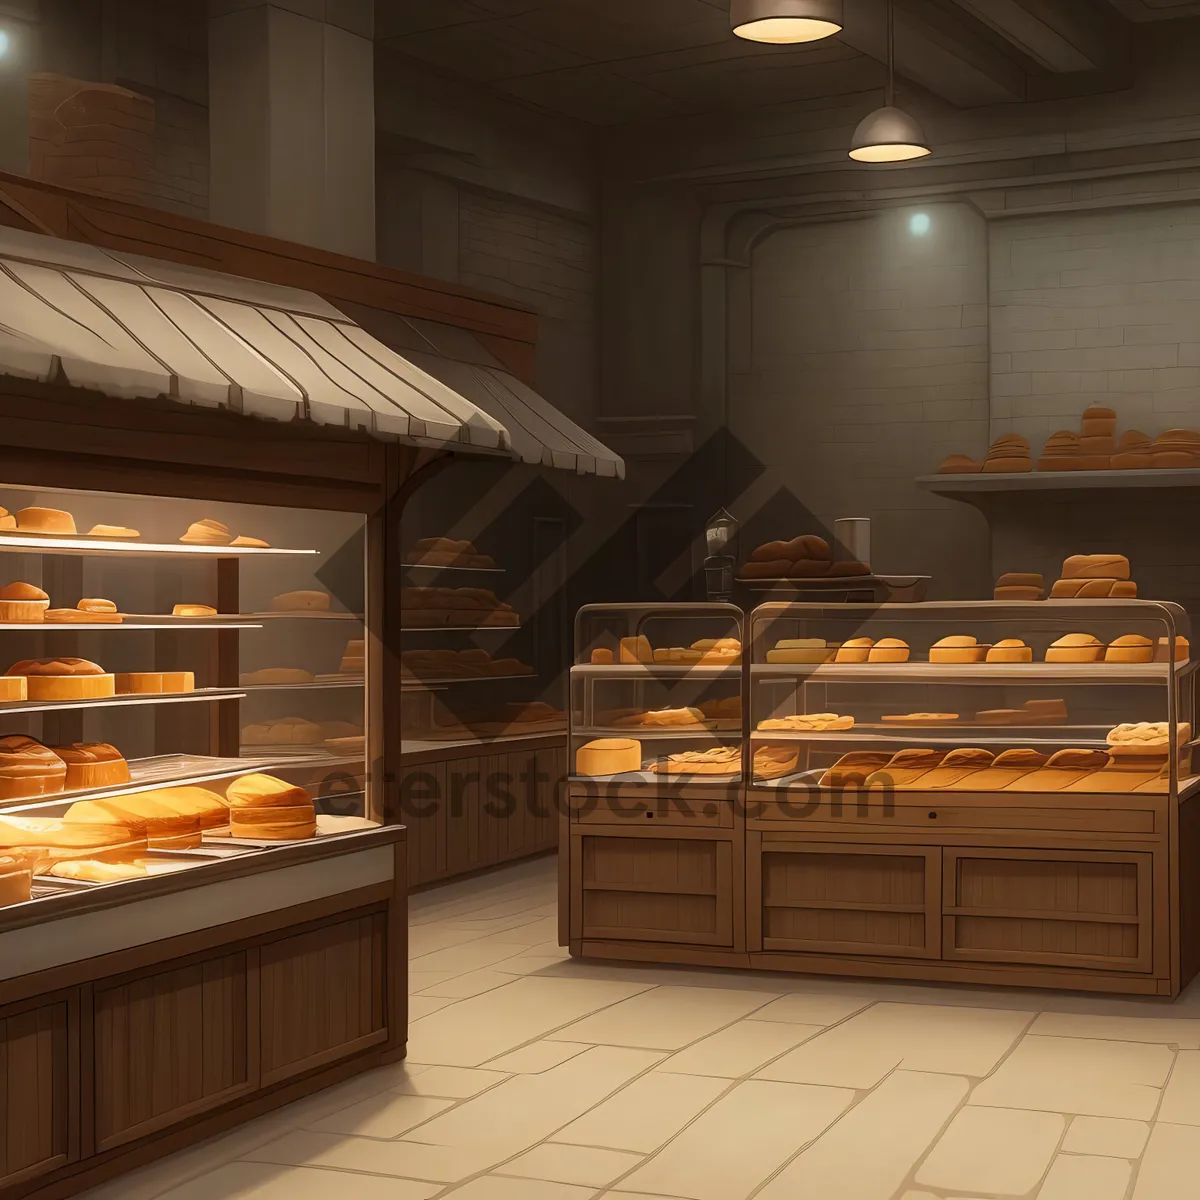 Picture of Modern Bakery Shop Interior with Wood-Finished Counter